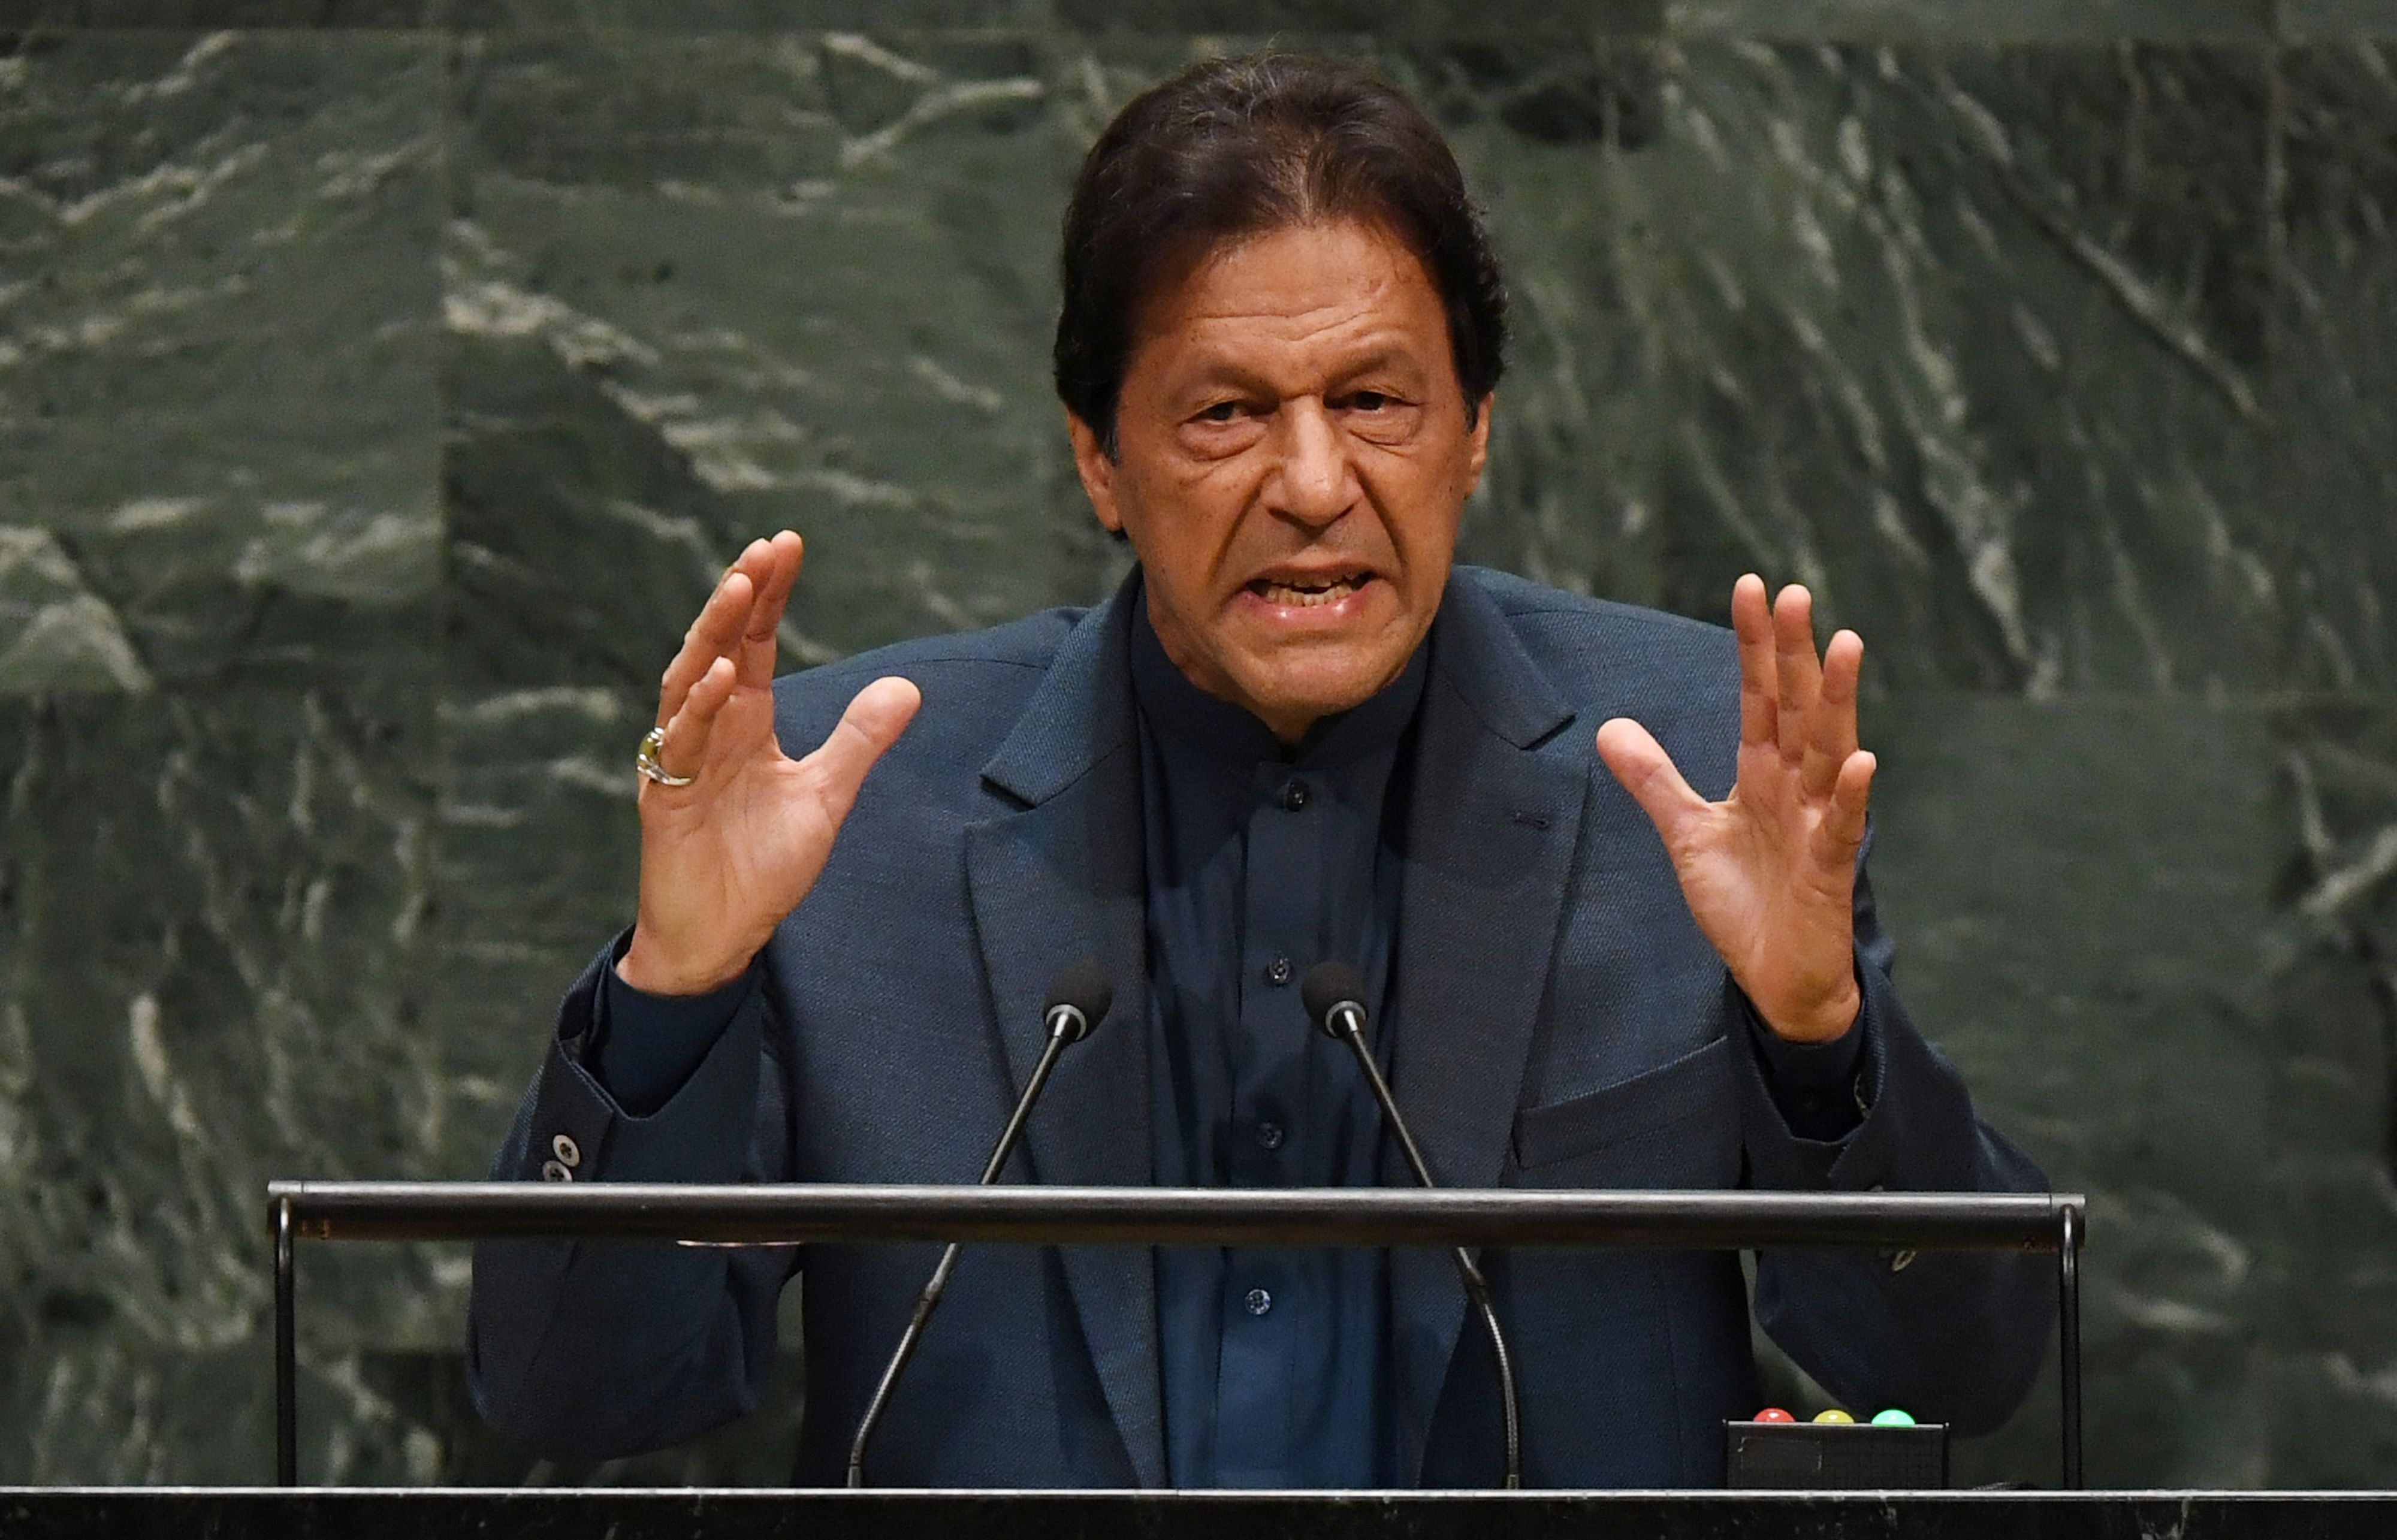 Pakistani Prime Minister Imran Khan speaks during the 74th Session of the General Assembly at UN Headquarters in New York. (AFP Photo)